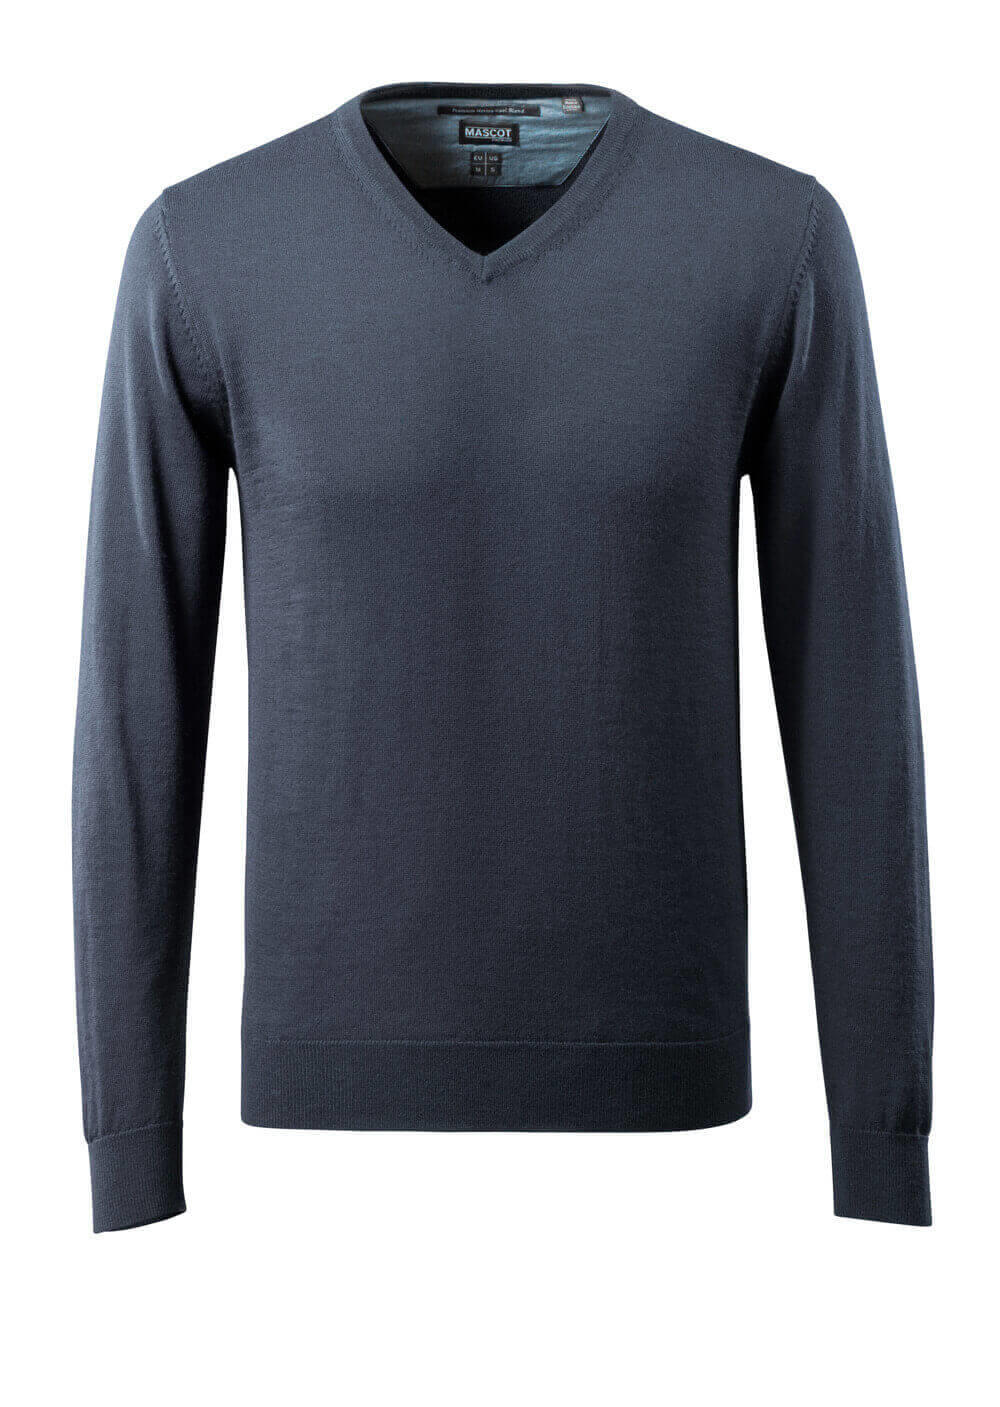 Knitted Jumper v-neck, with merino wool